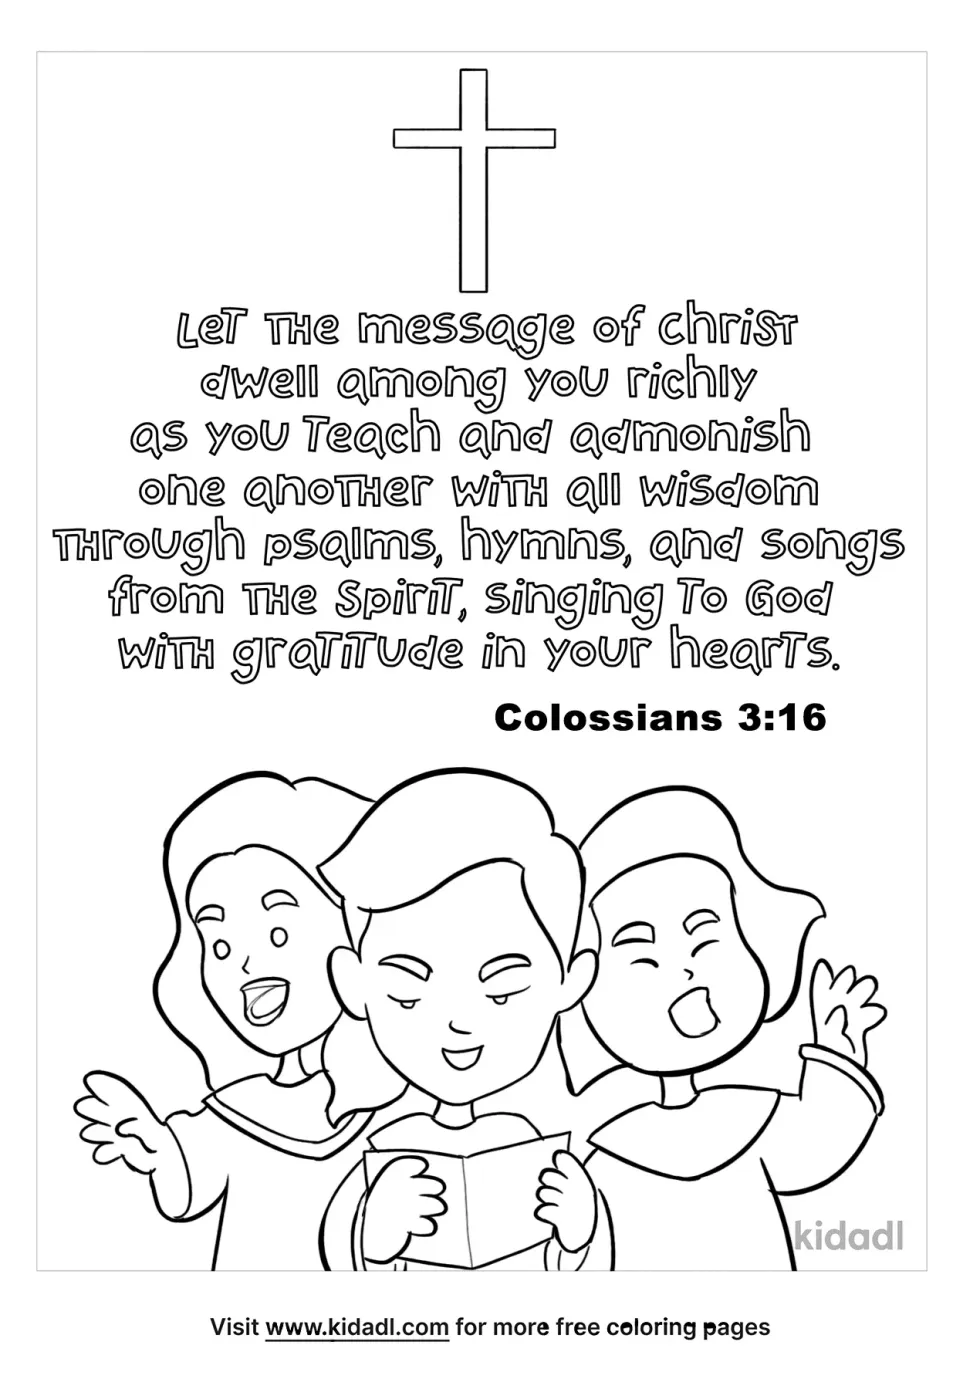 Colossians 3:16 Coloring Page